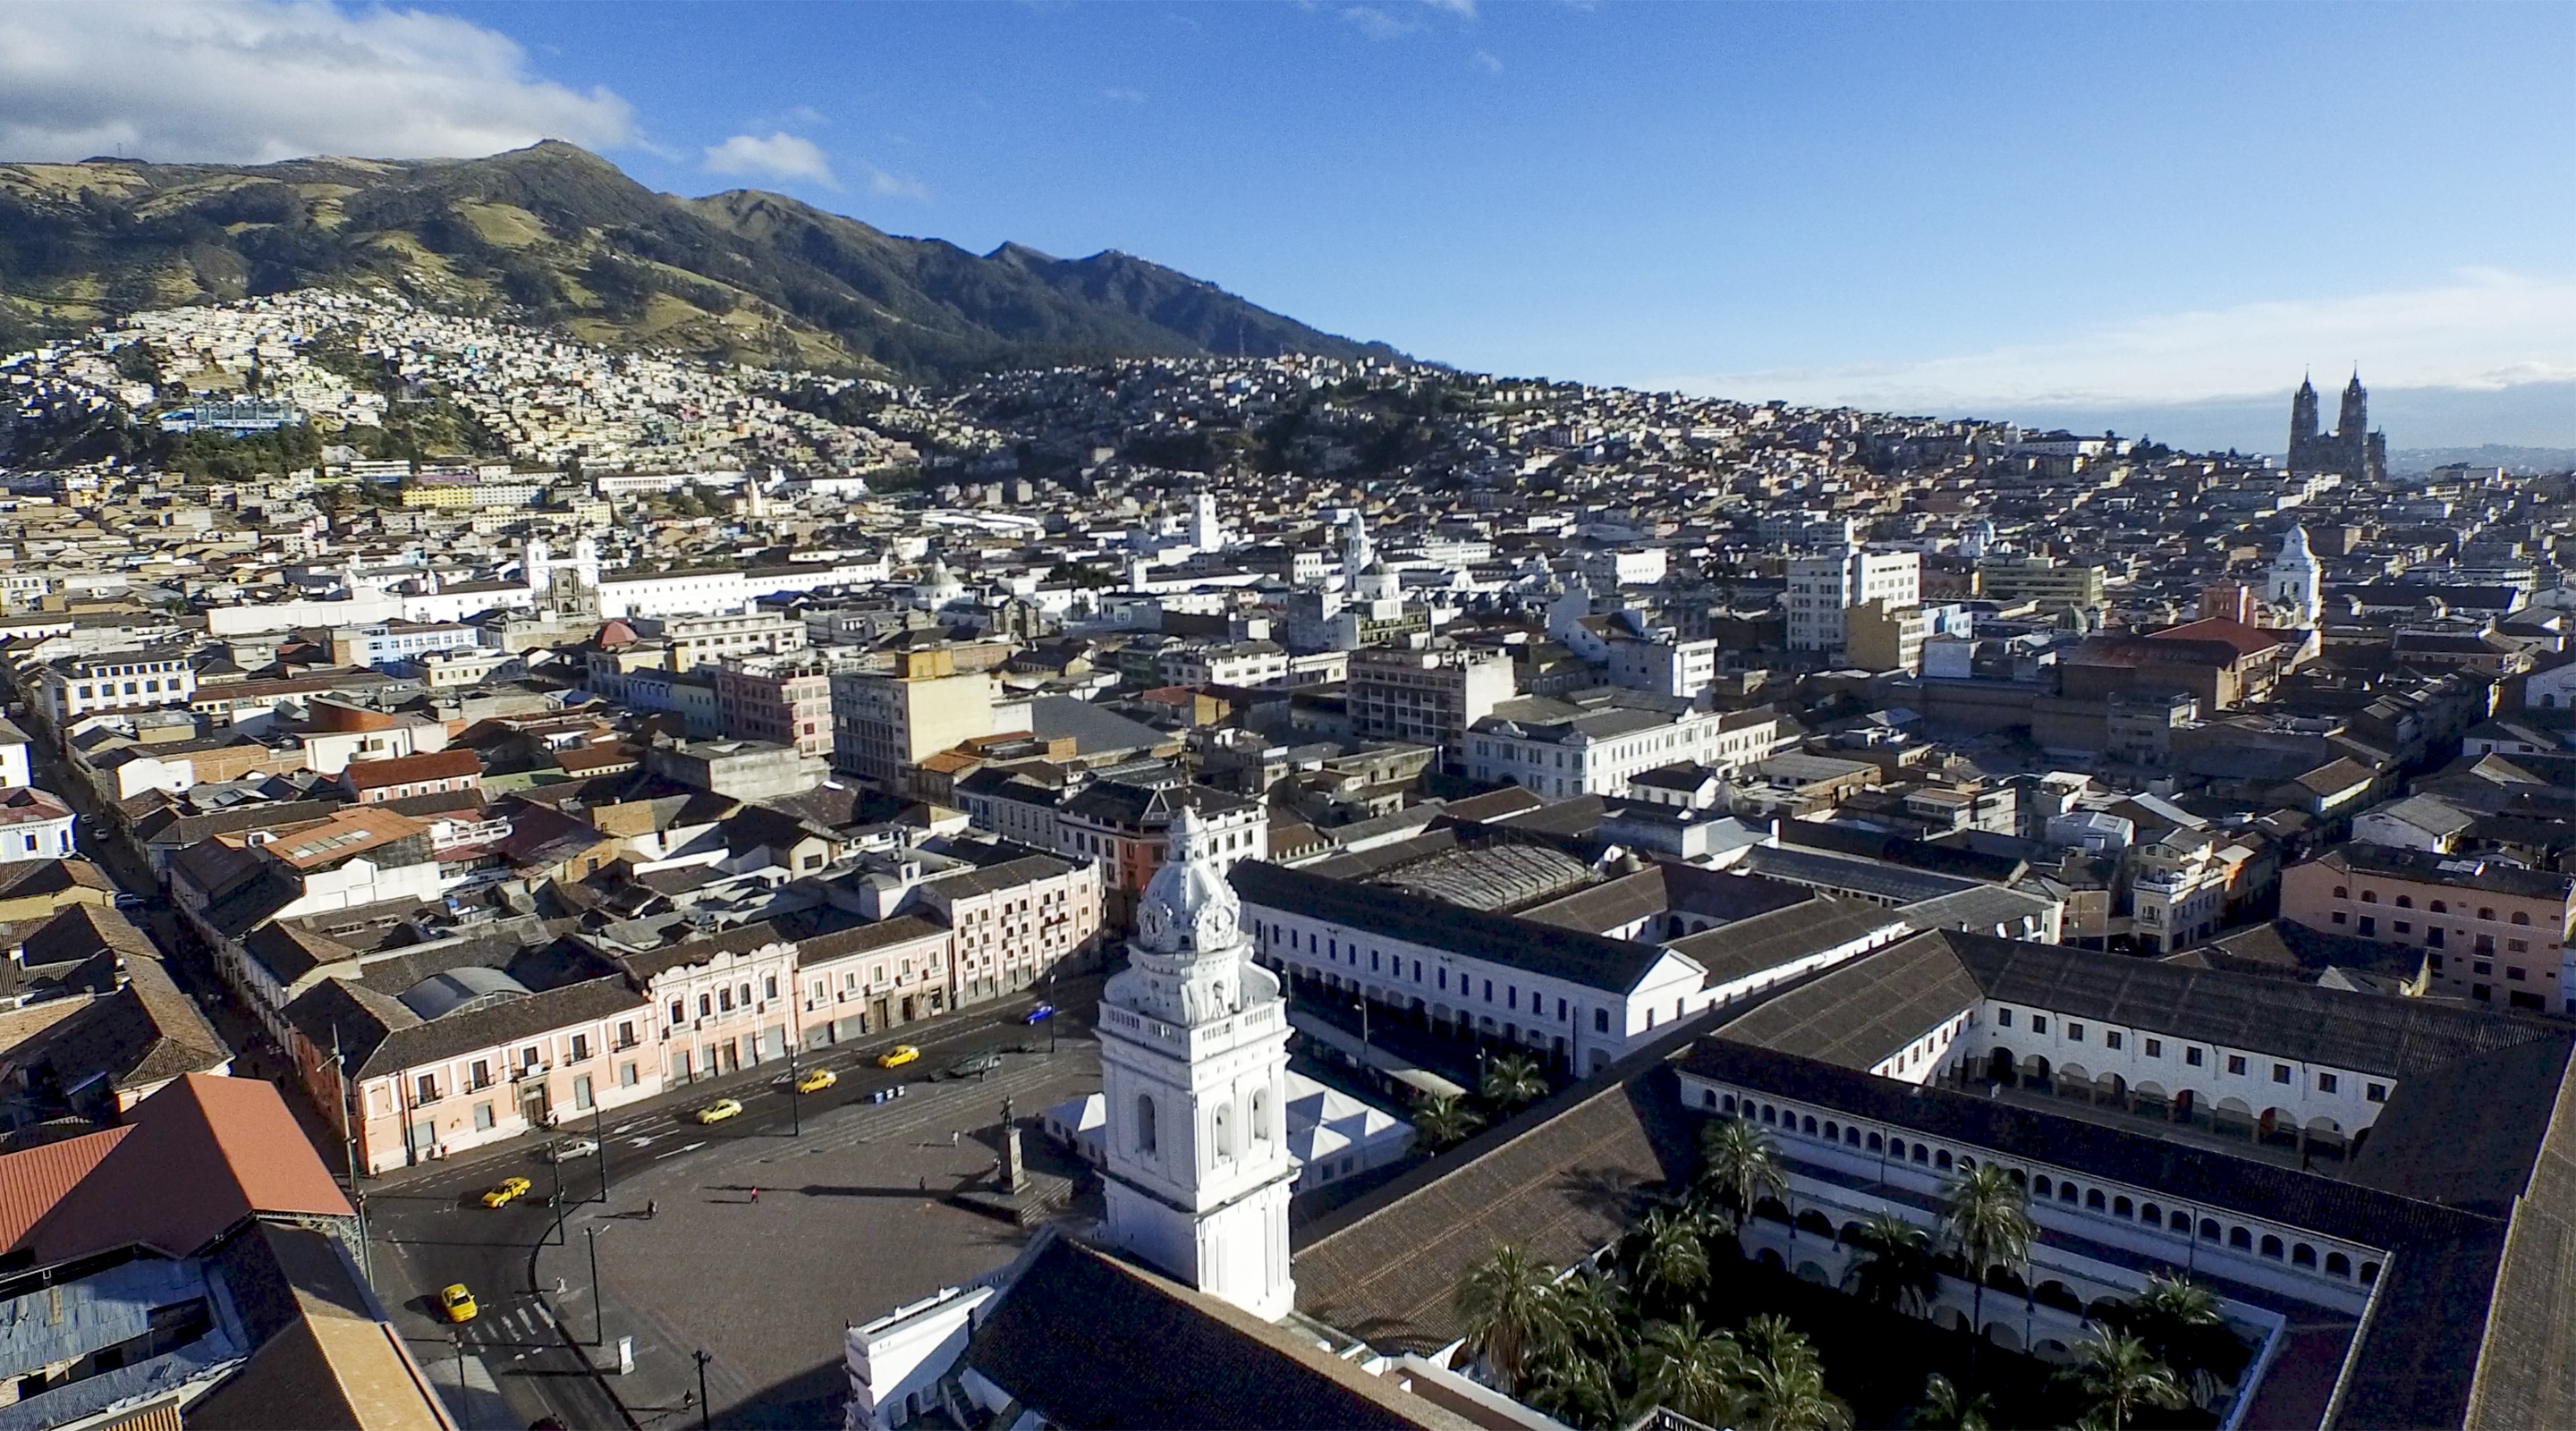 Historic center of Quito with Ruco Pichincha in the background.